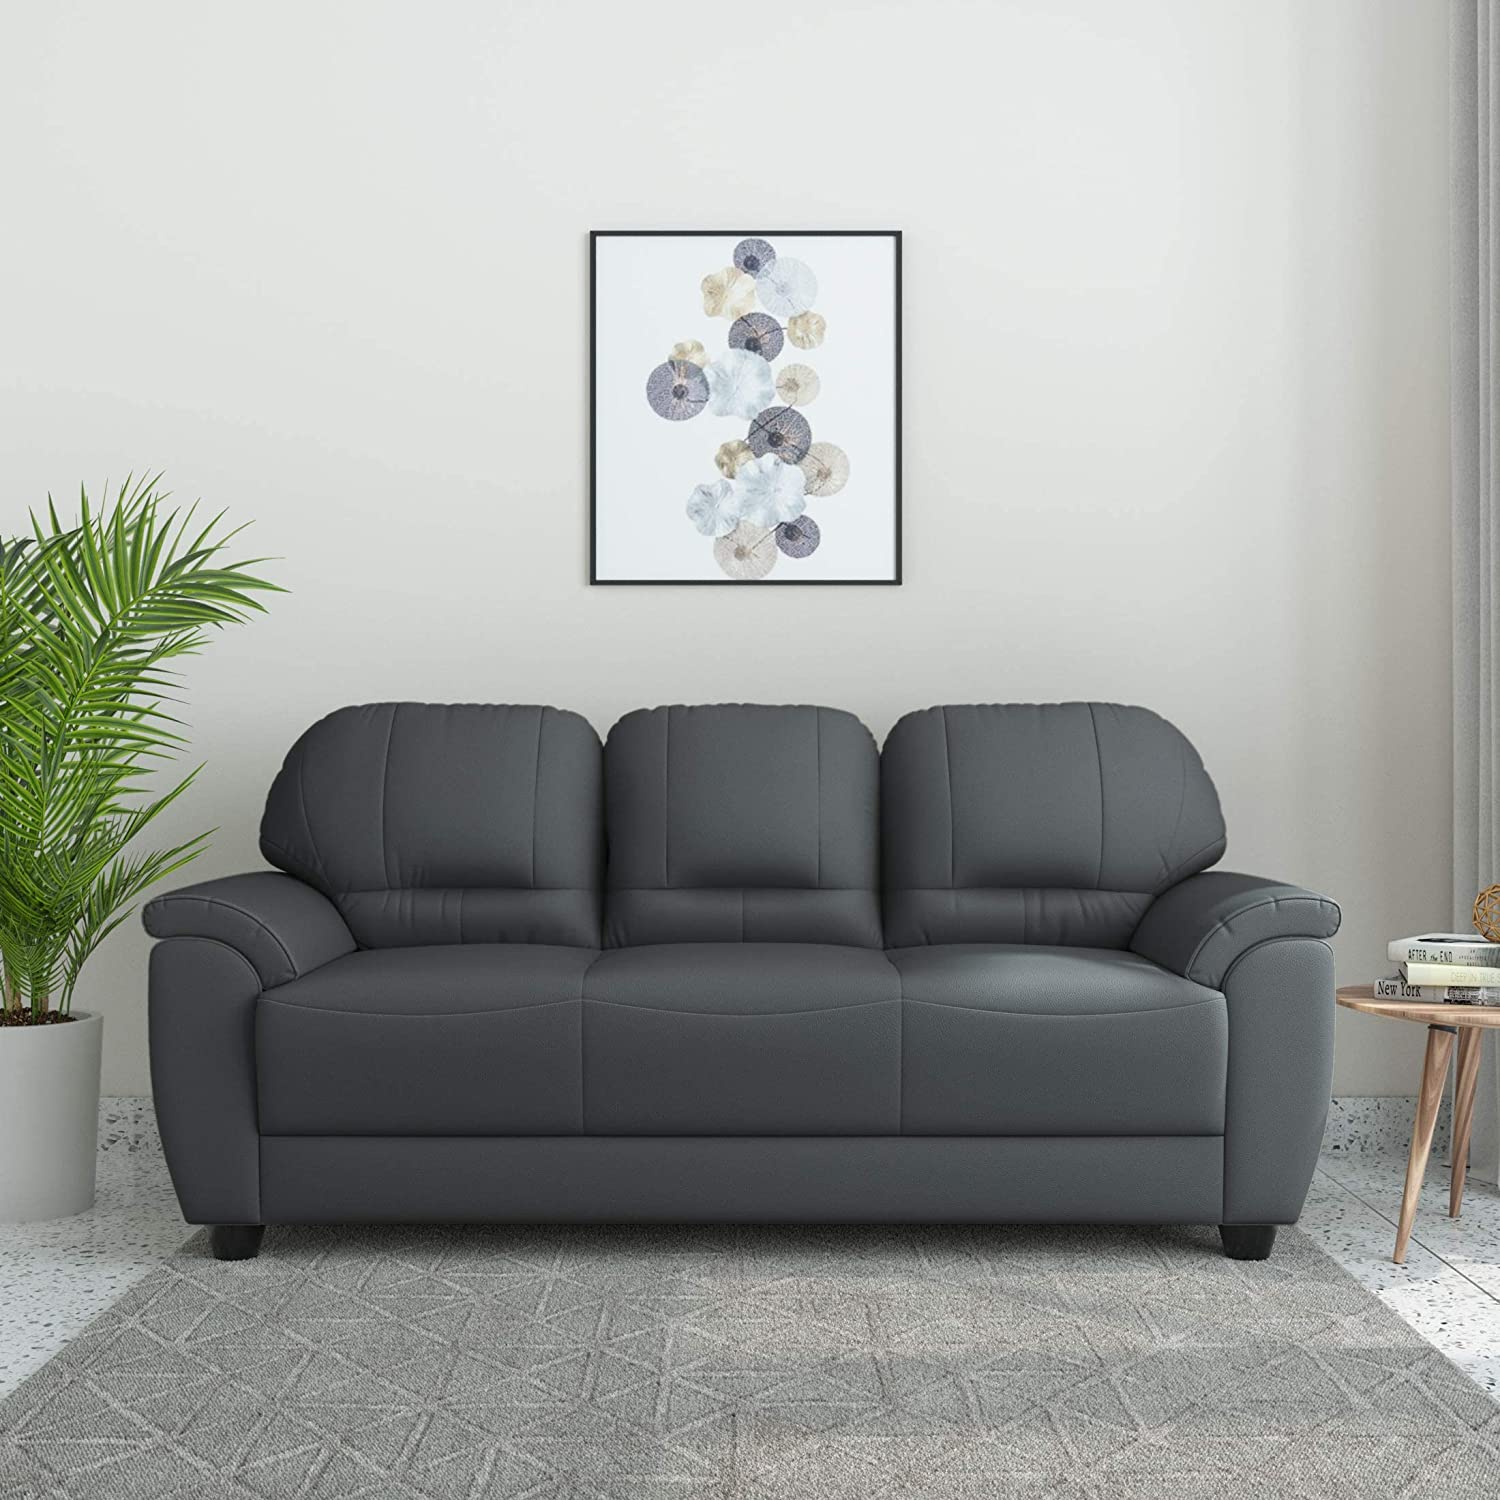 Sofa: A New Kind of Home